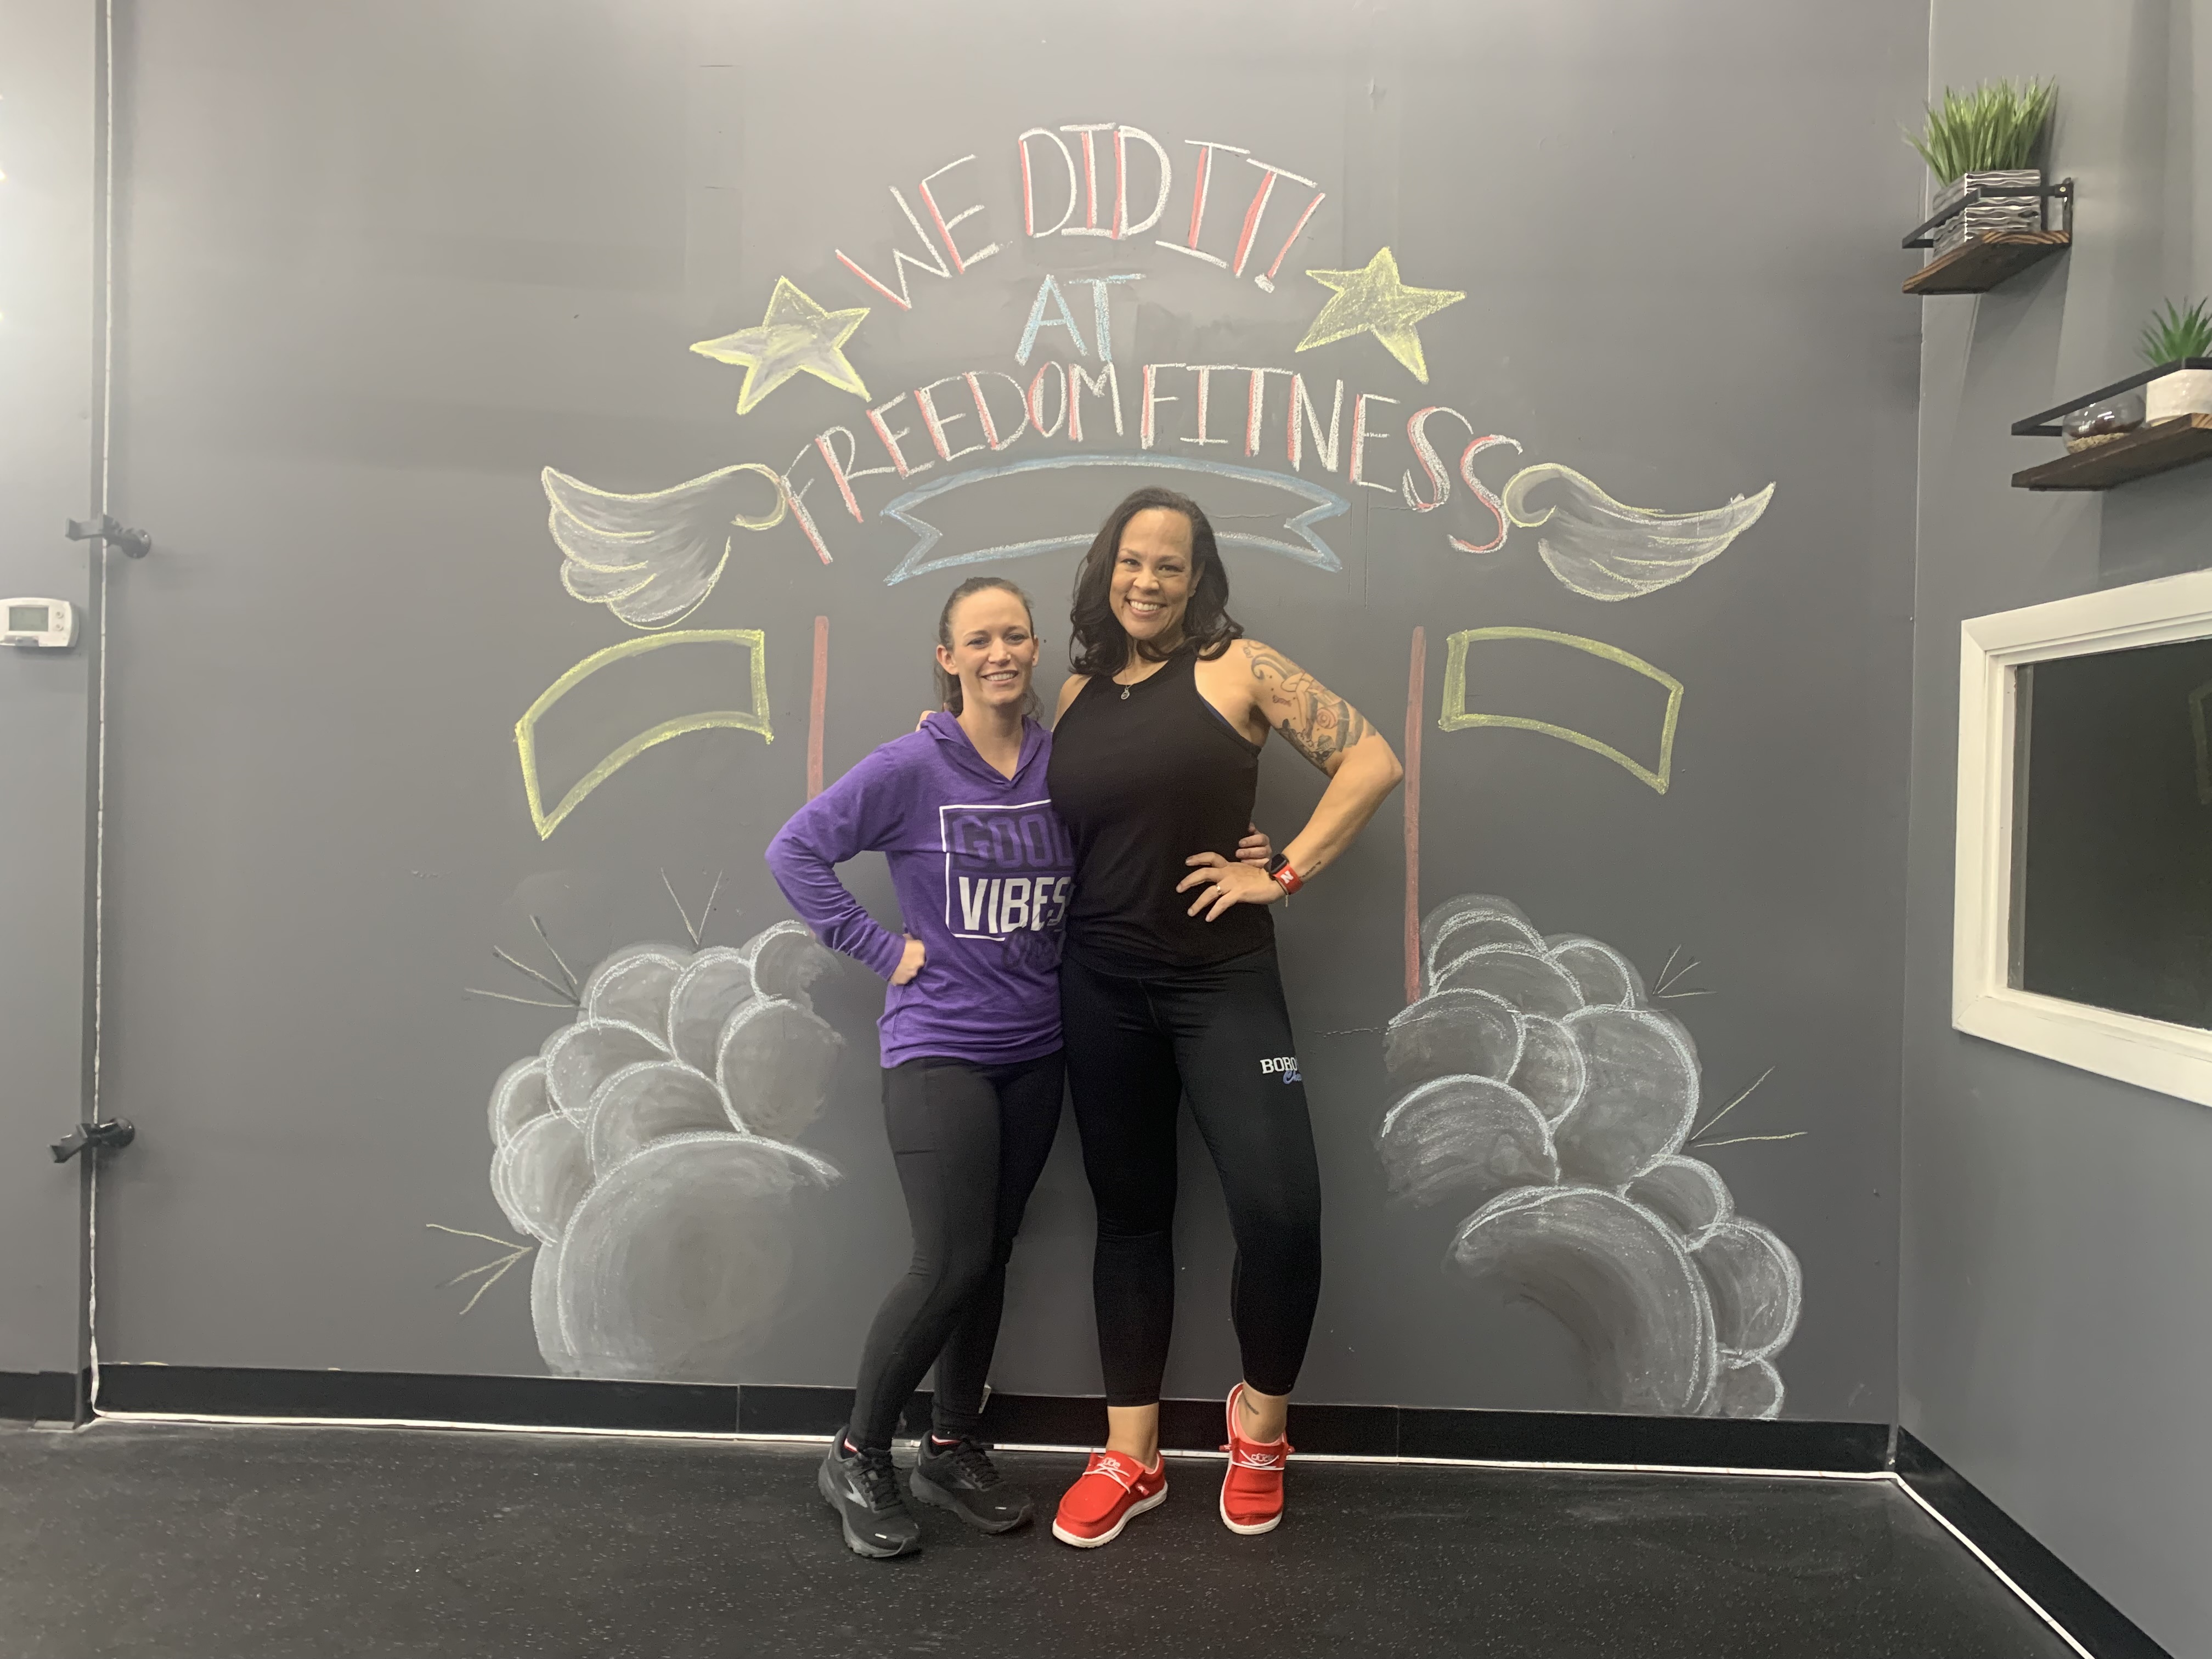 K.C. Culbreath (left) and Jennifer Kern (right), the owners of Freedom Fly Fitness, a bungee fitness gym located at 976 Miamisburg Centerville Road.